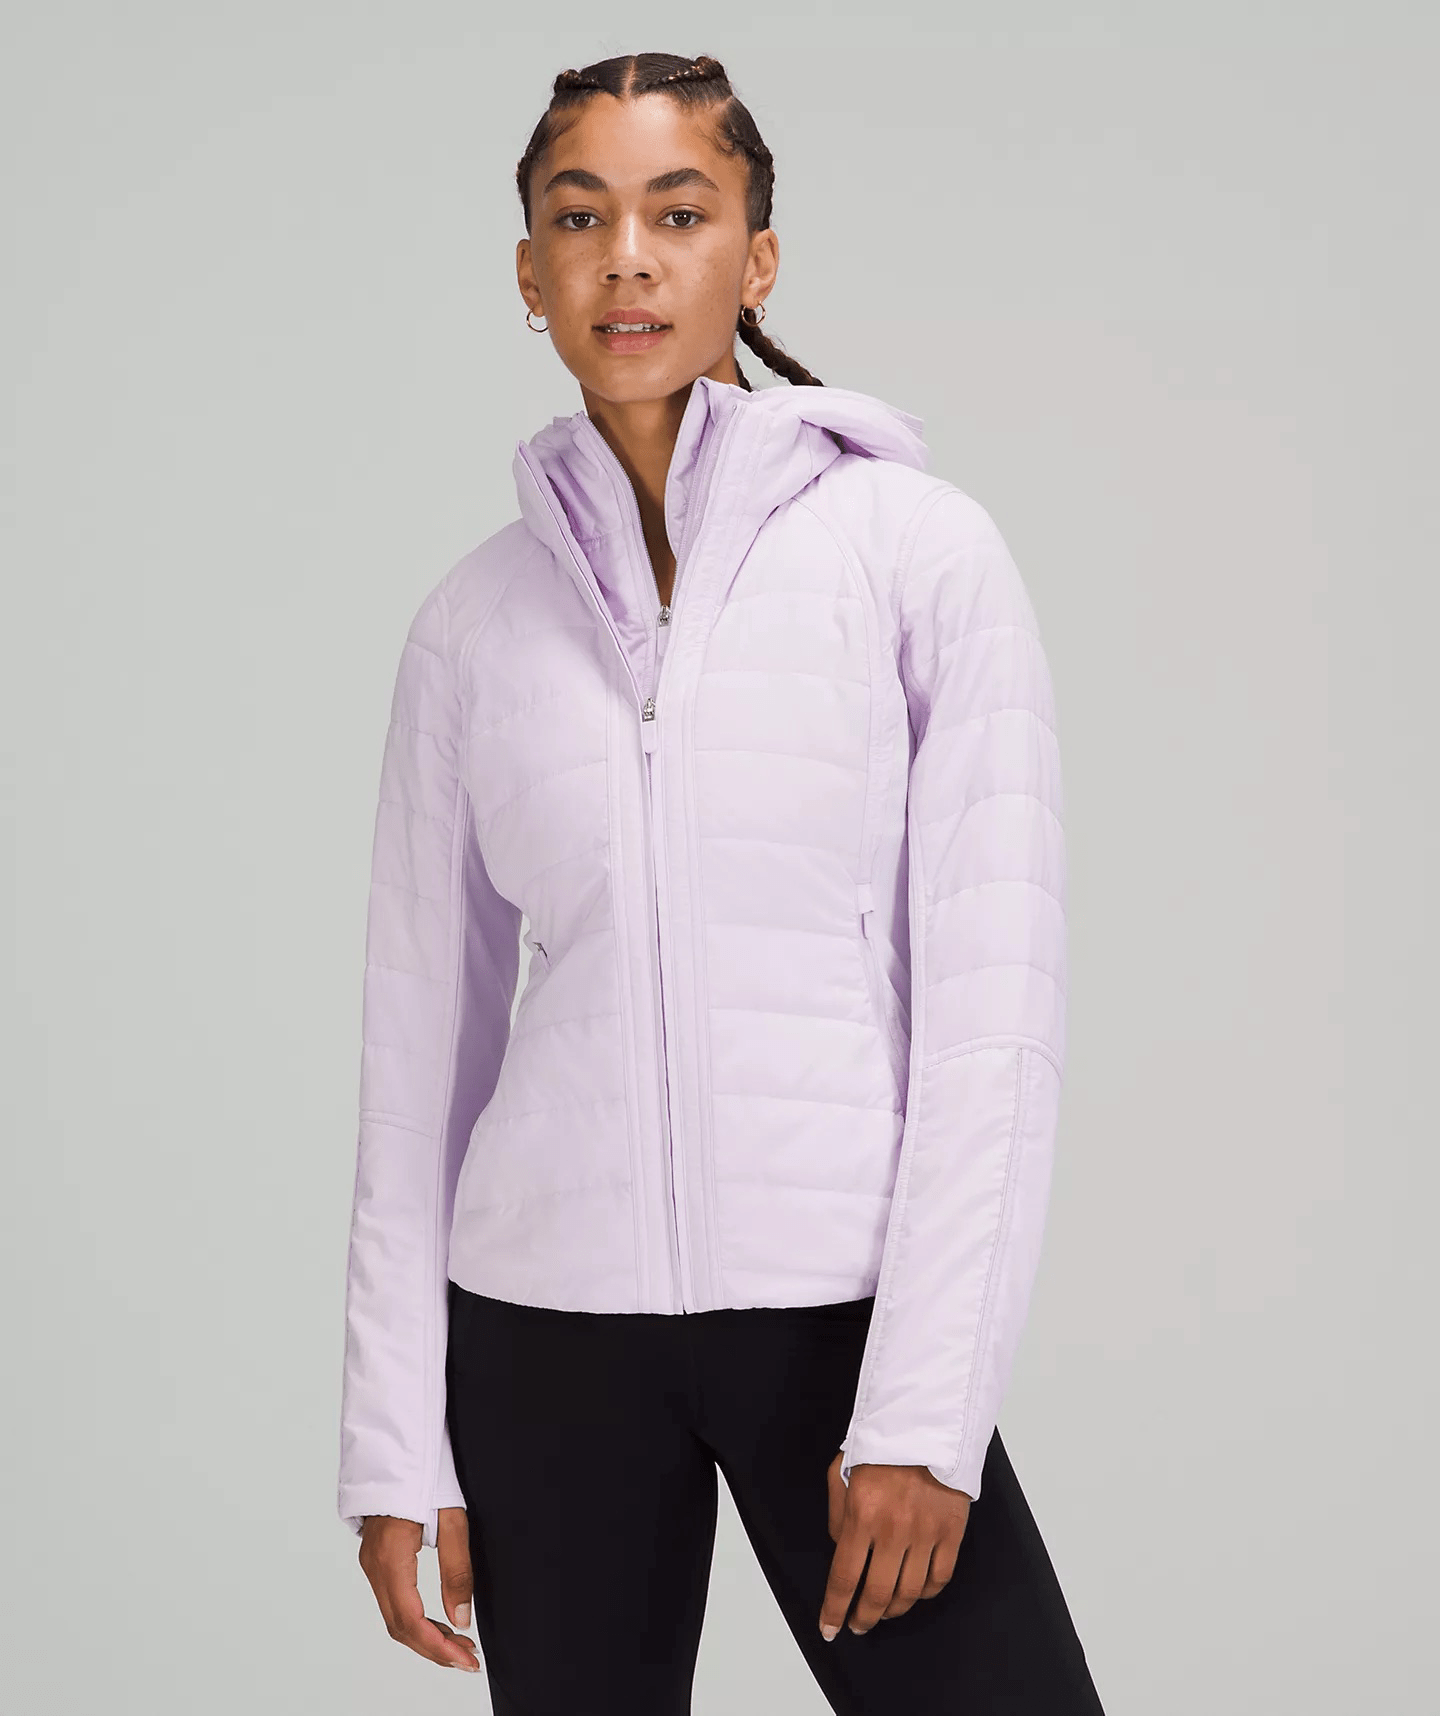 Another Mile Jacket - Last Minute Gift Ideas with lululemon